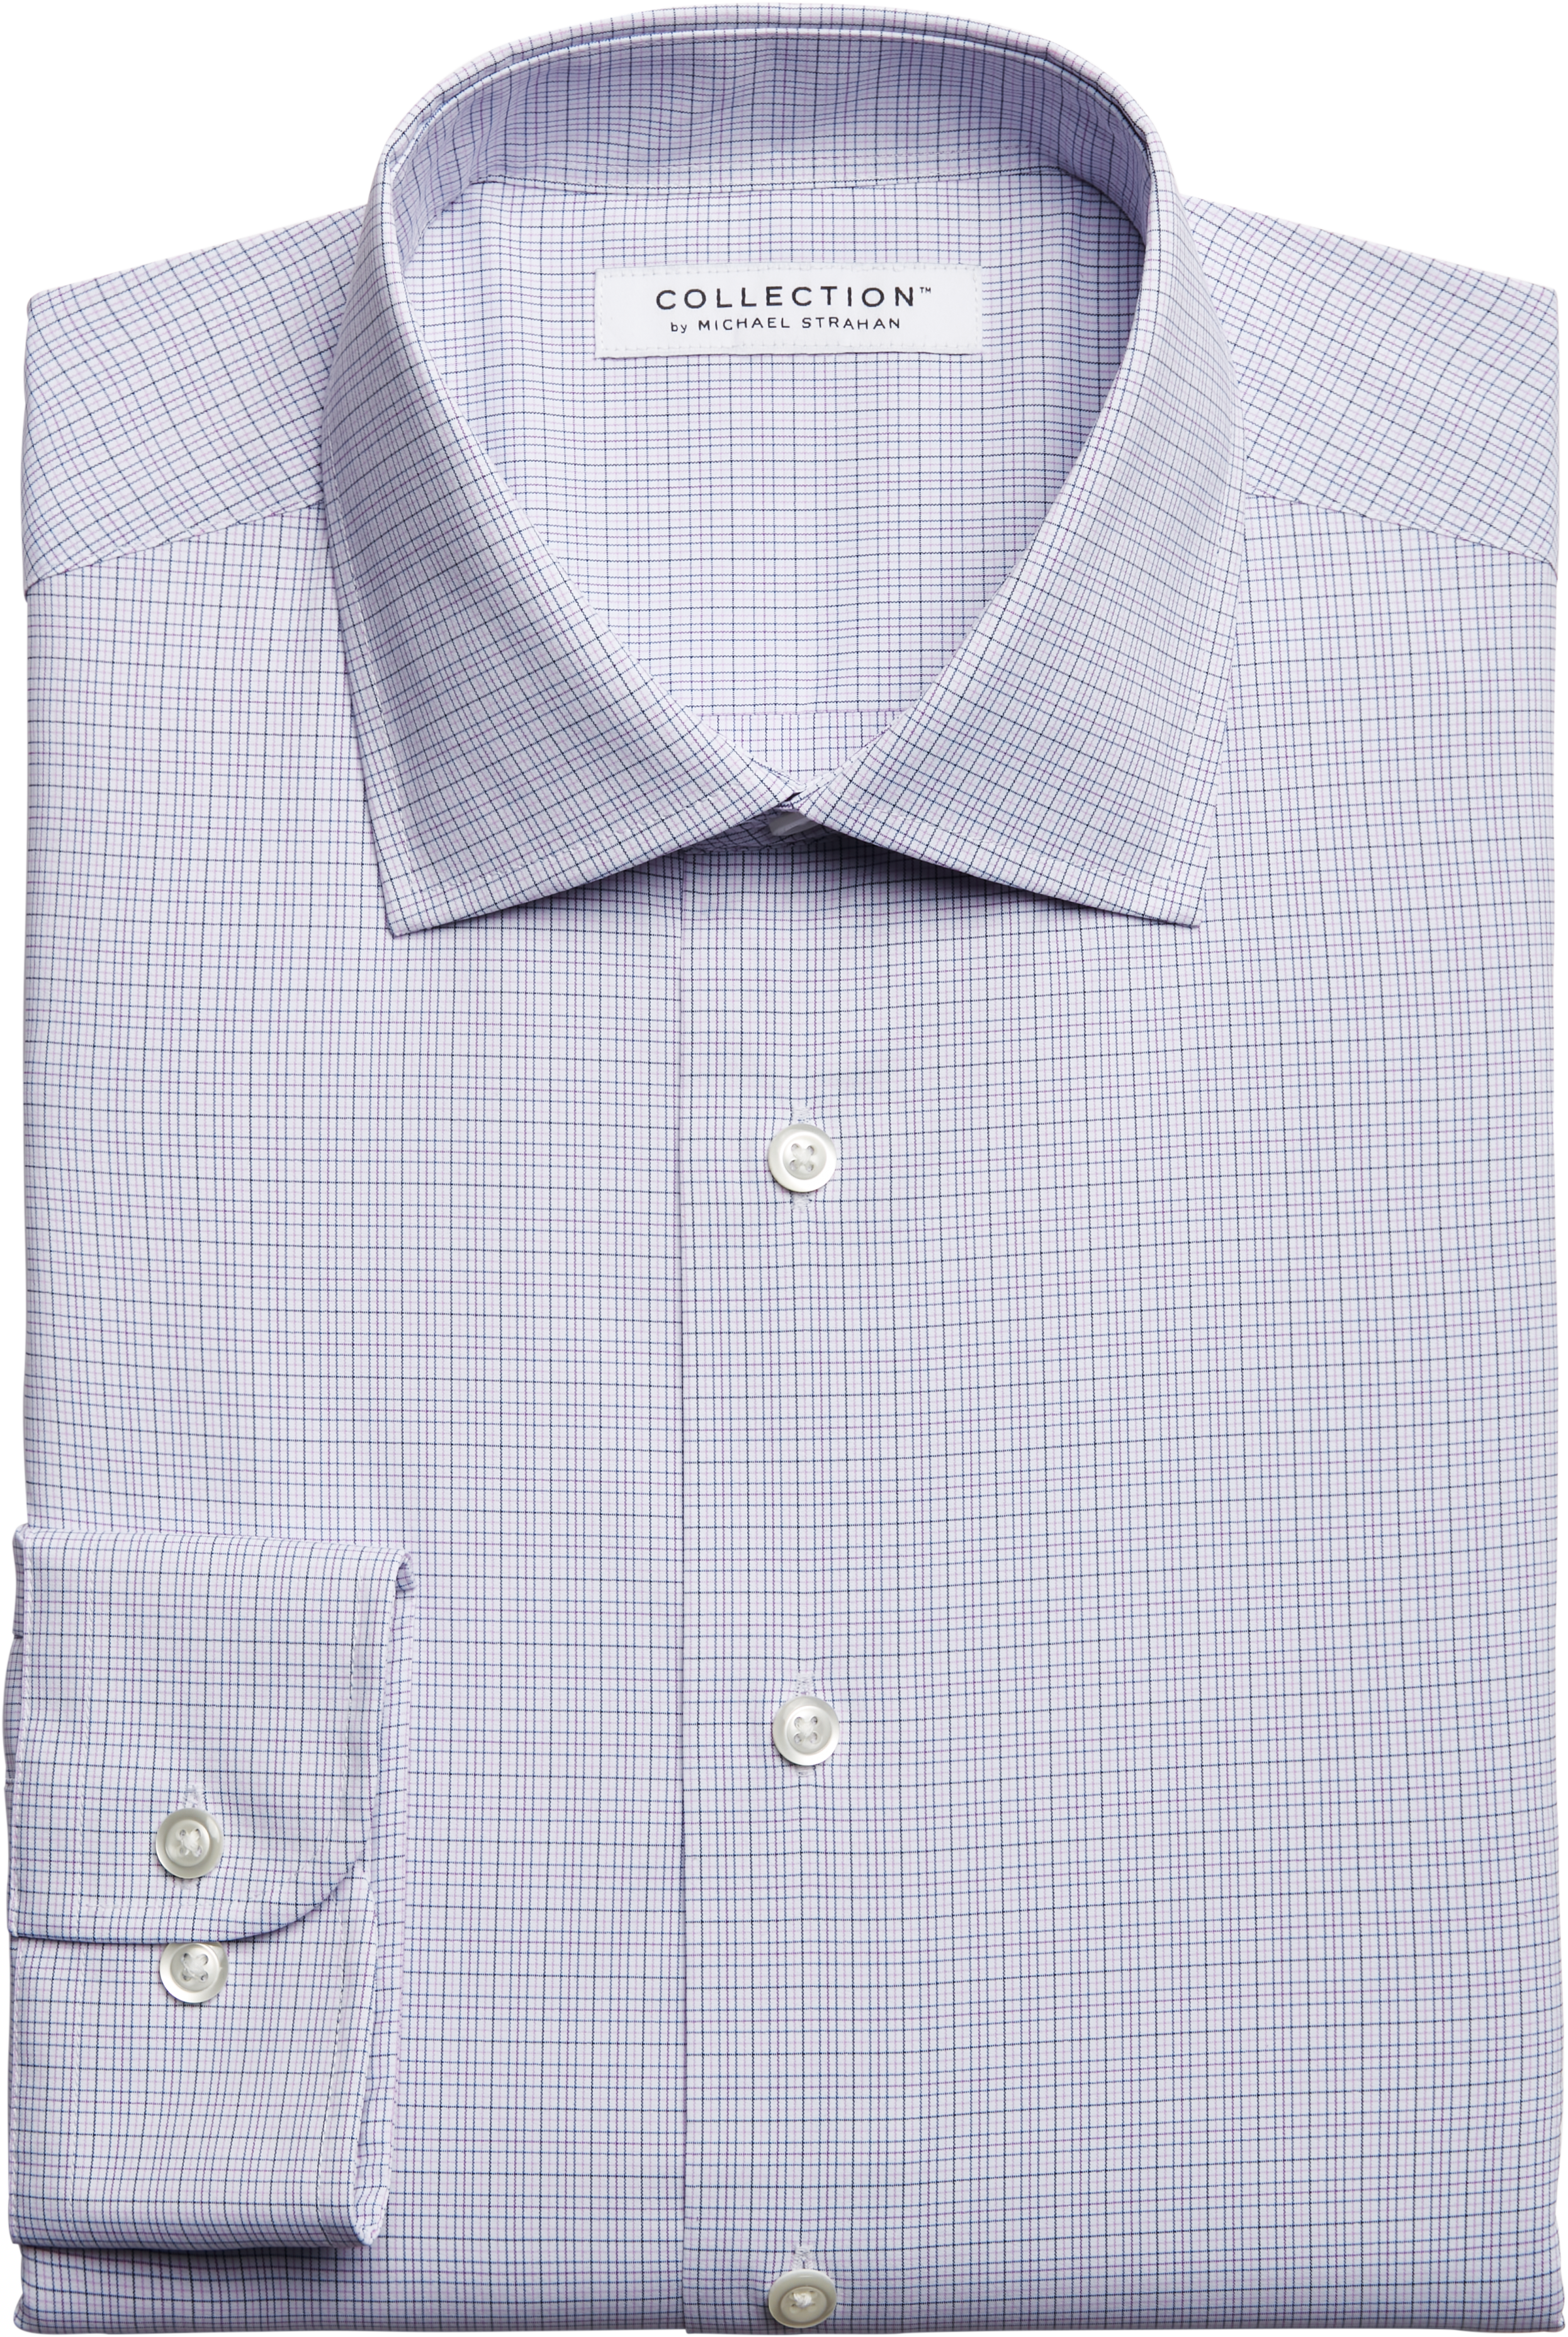 Collection By Michael Strahan Classic Fit Dress Shirt, Blue Grid - Men ...